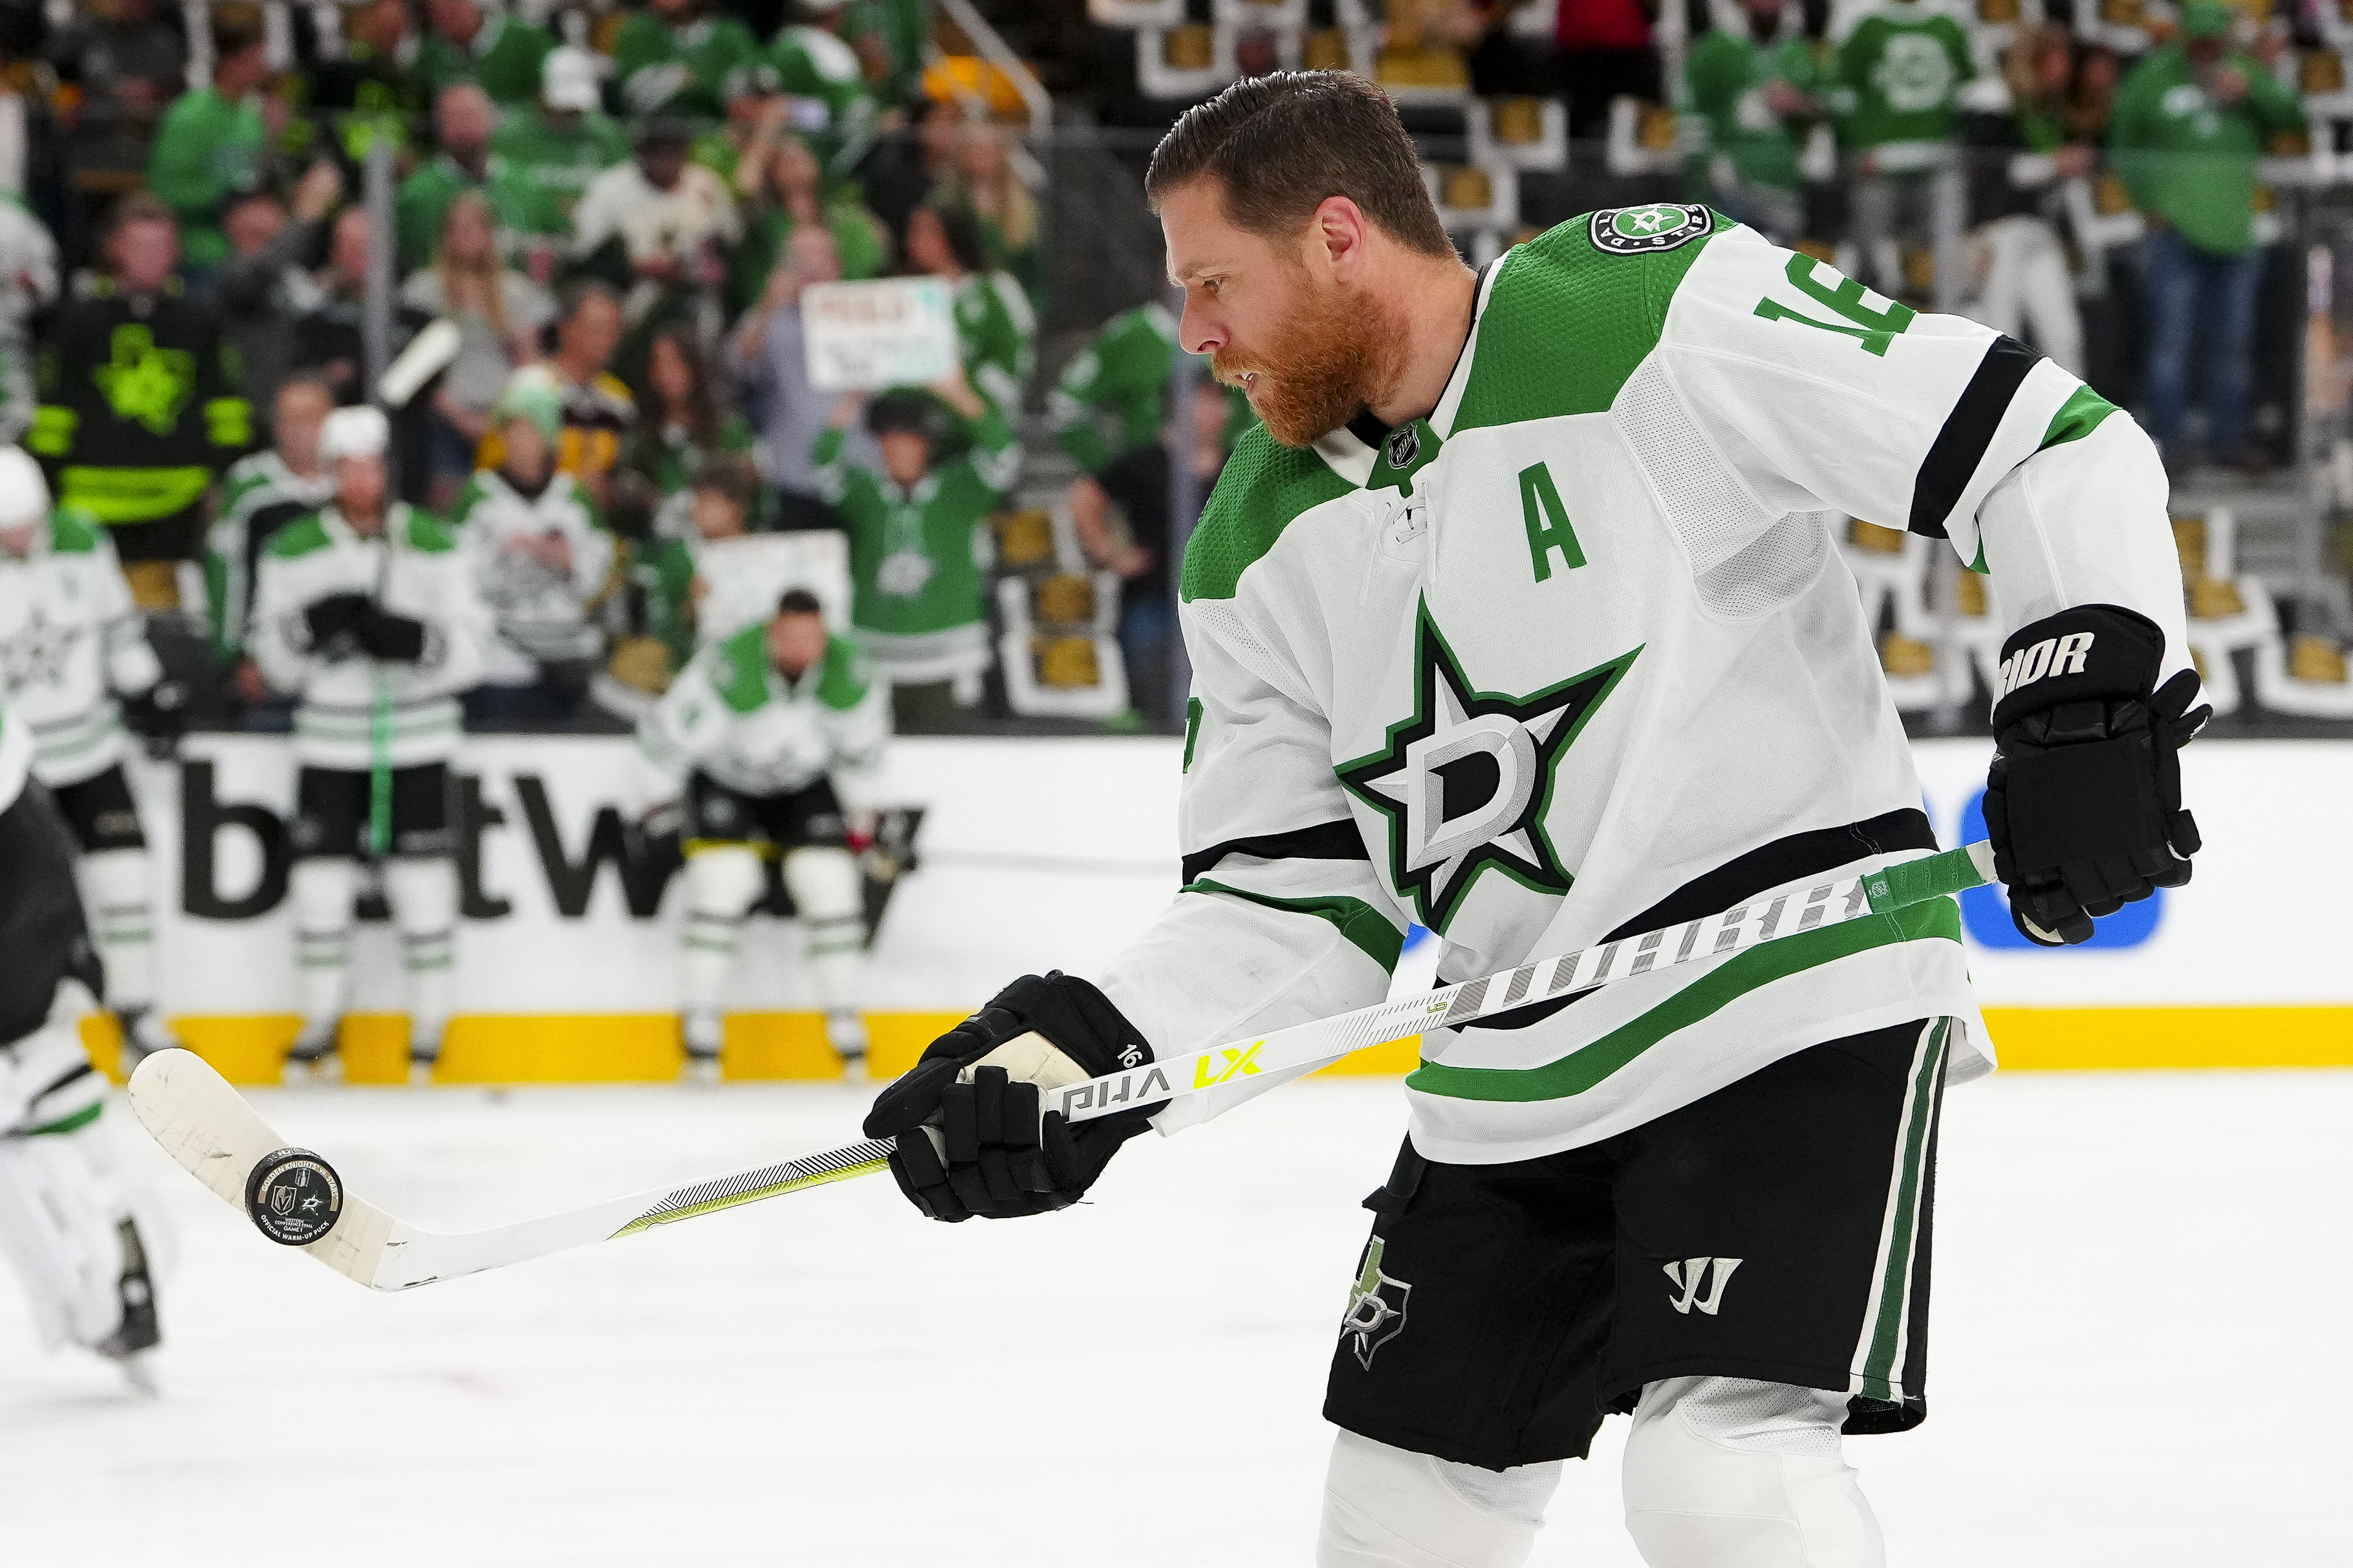 Dallas Stars players skate out for warm ups wearing a special